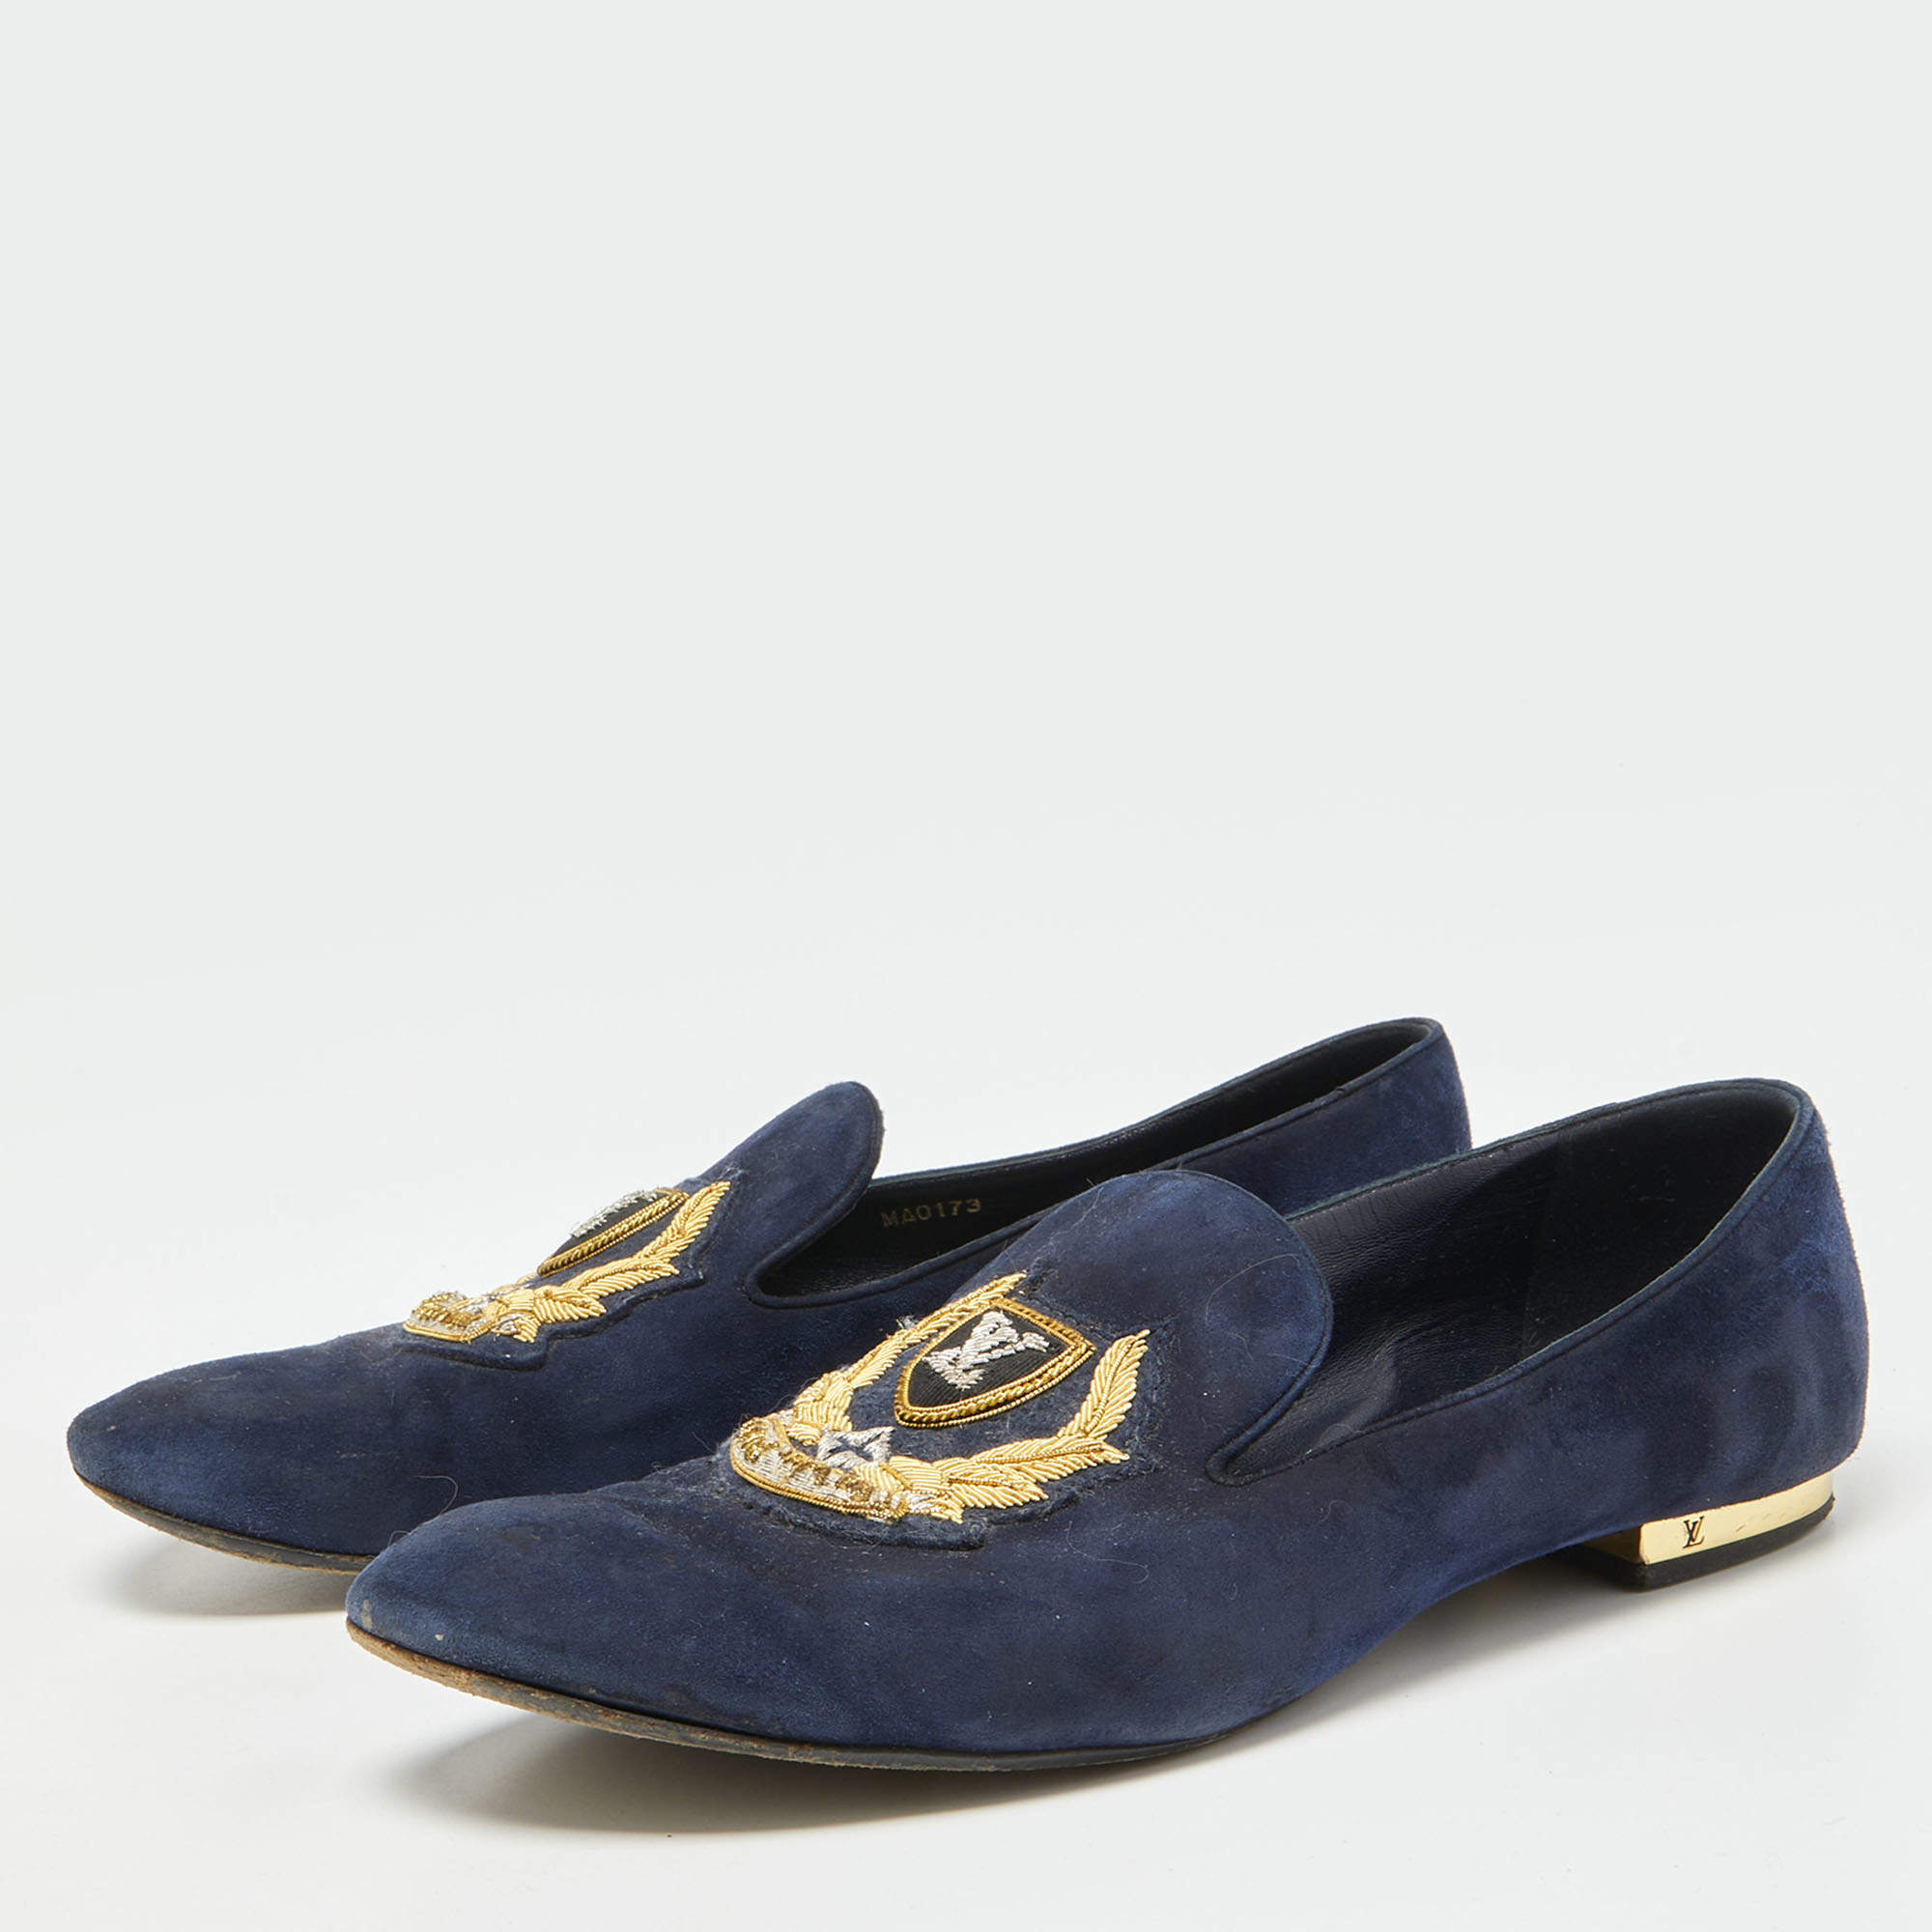 Louis Vuitton Blue Suede Embroidered Smoking Slippers Size 38